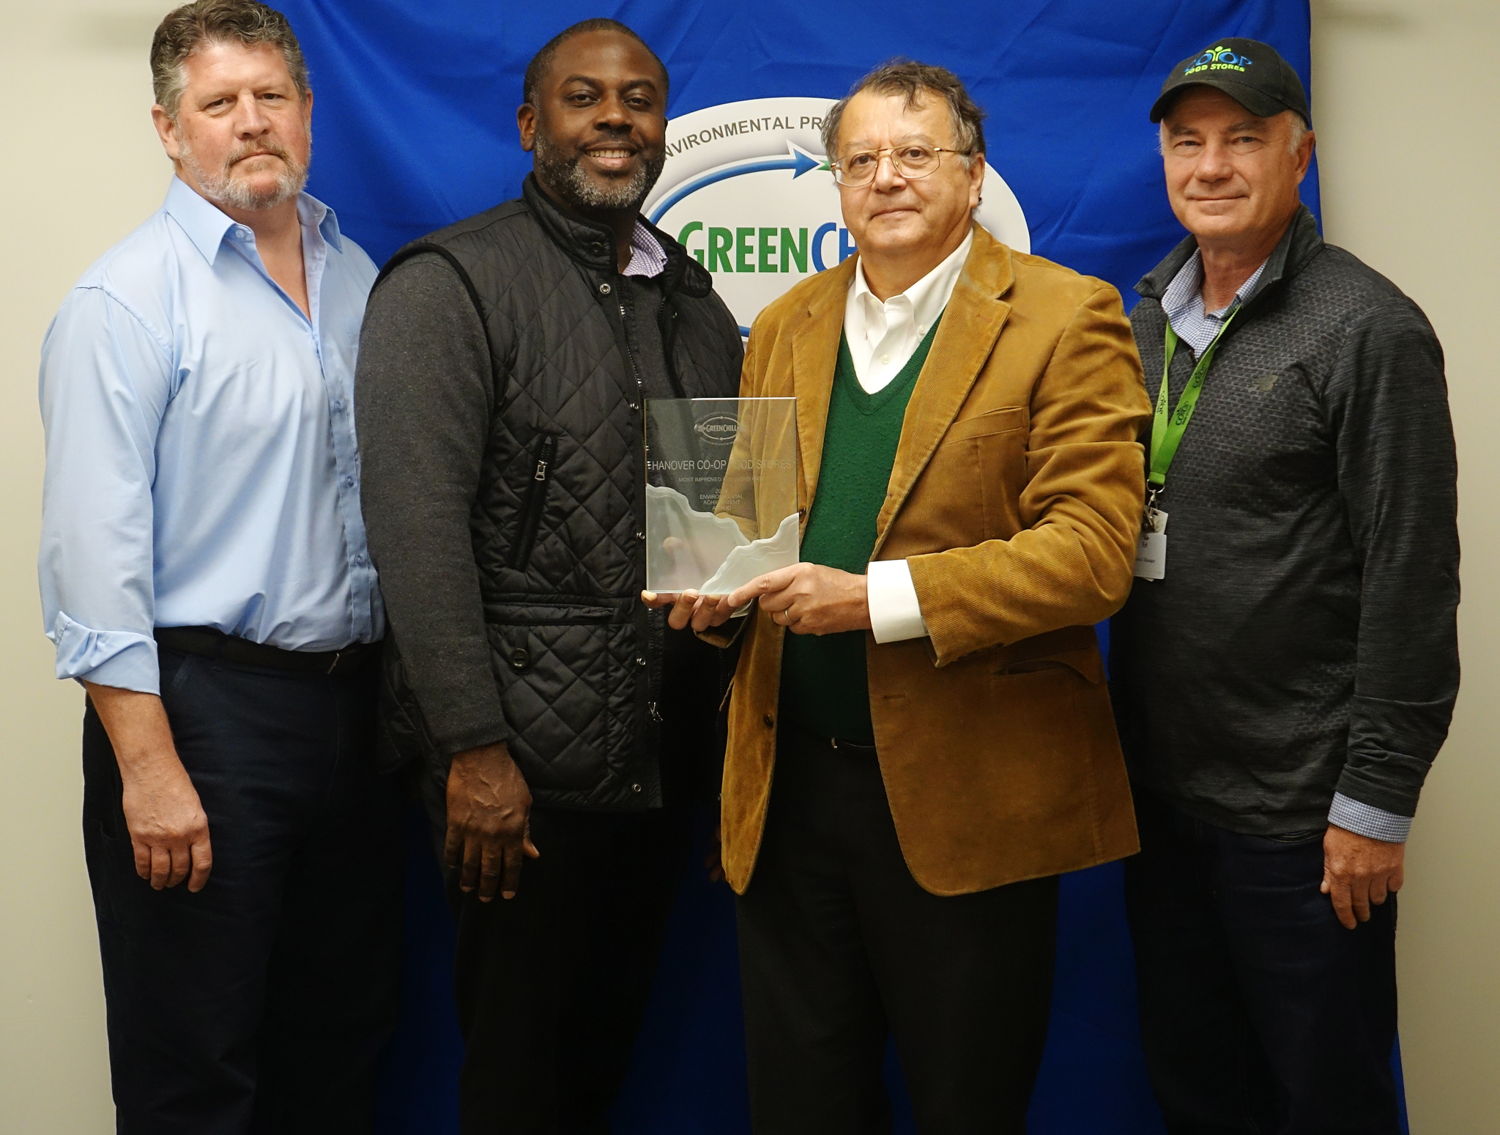 Shown (left to right) with this year’s award are Hanover Co-op managers and board members Jonathan Garthwaite, project administrator; Emanuel Ajavon, board secretary; Benoit Roisin, treasurer; Ed Fox, general manager.